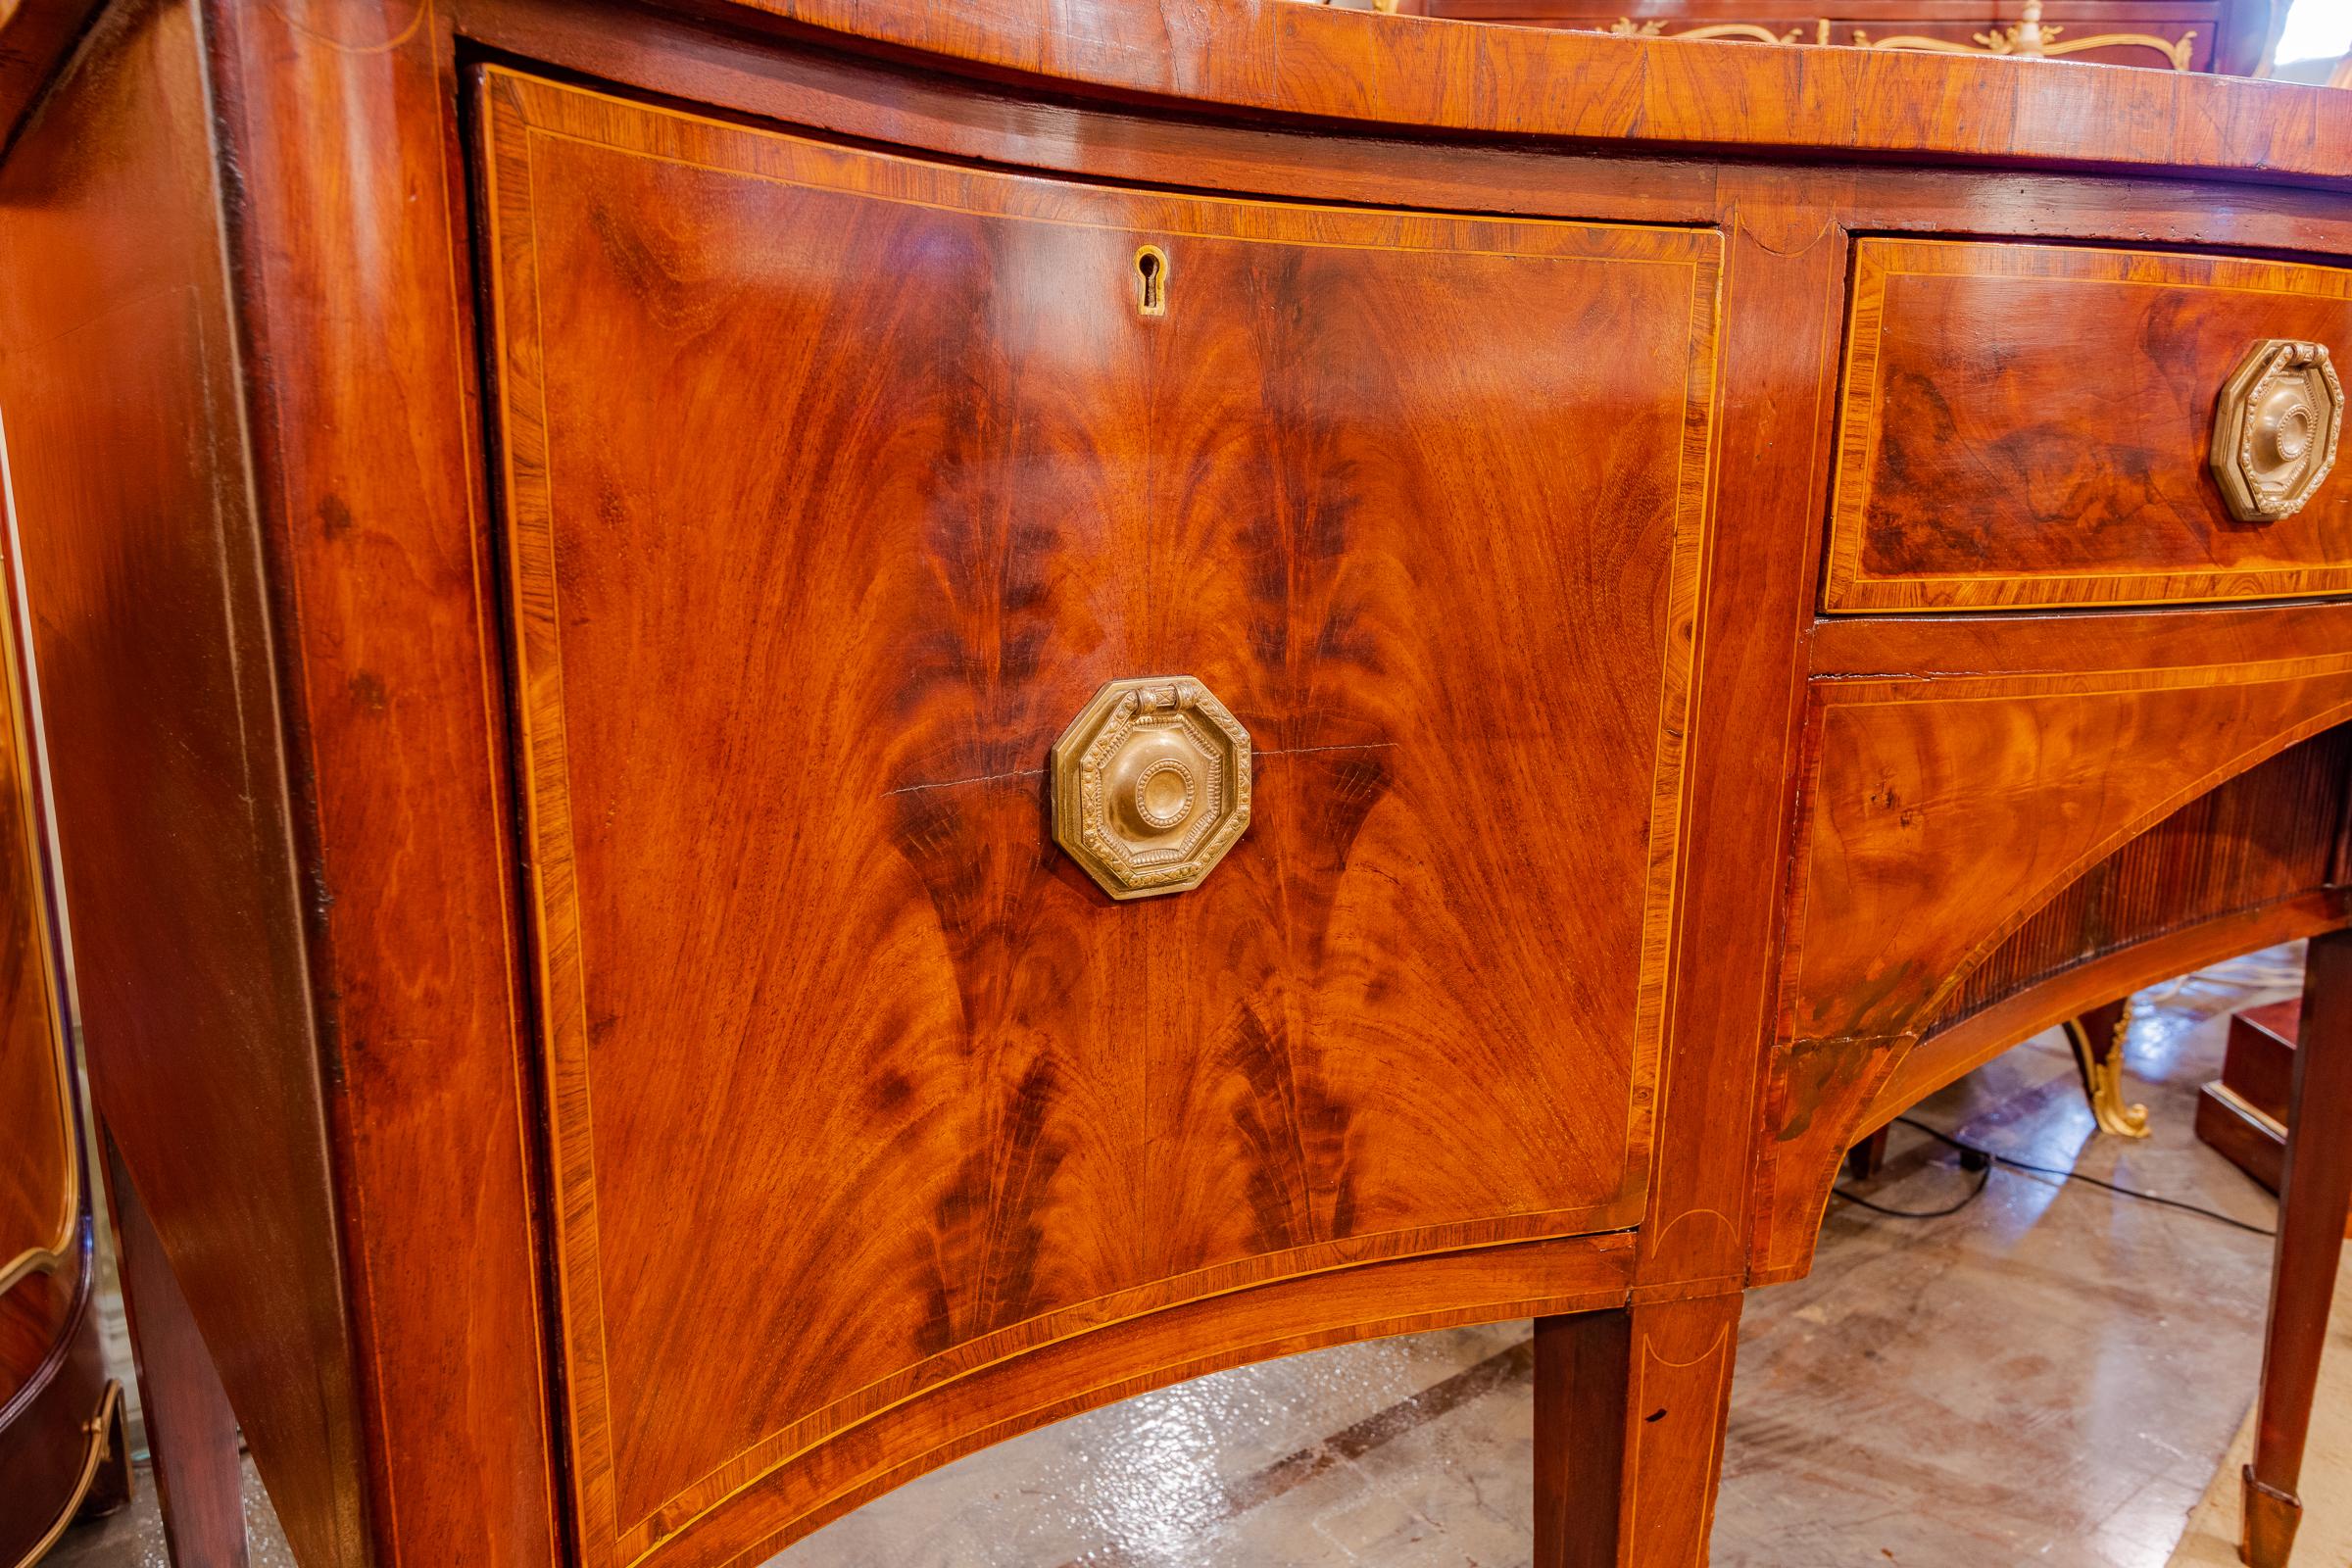 Regency period mahogany and rosewood inlayed sideboard.